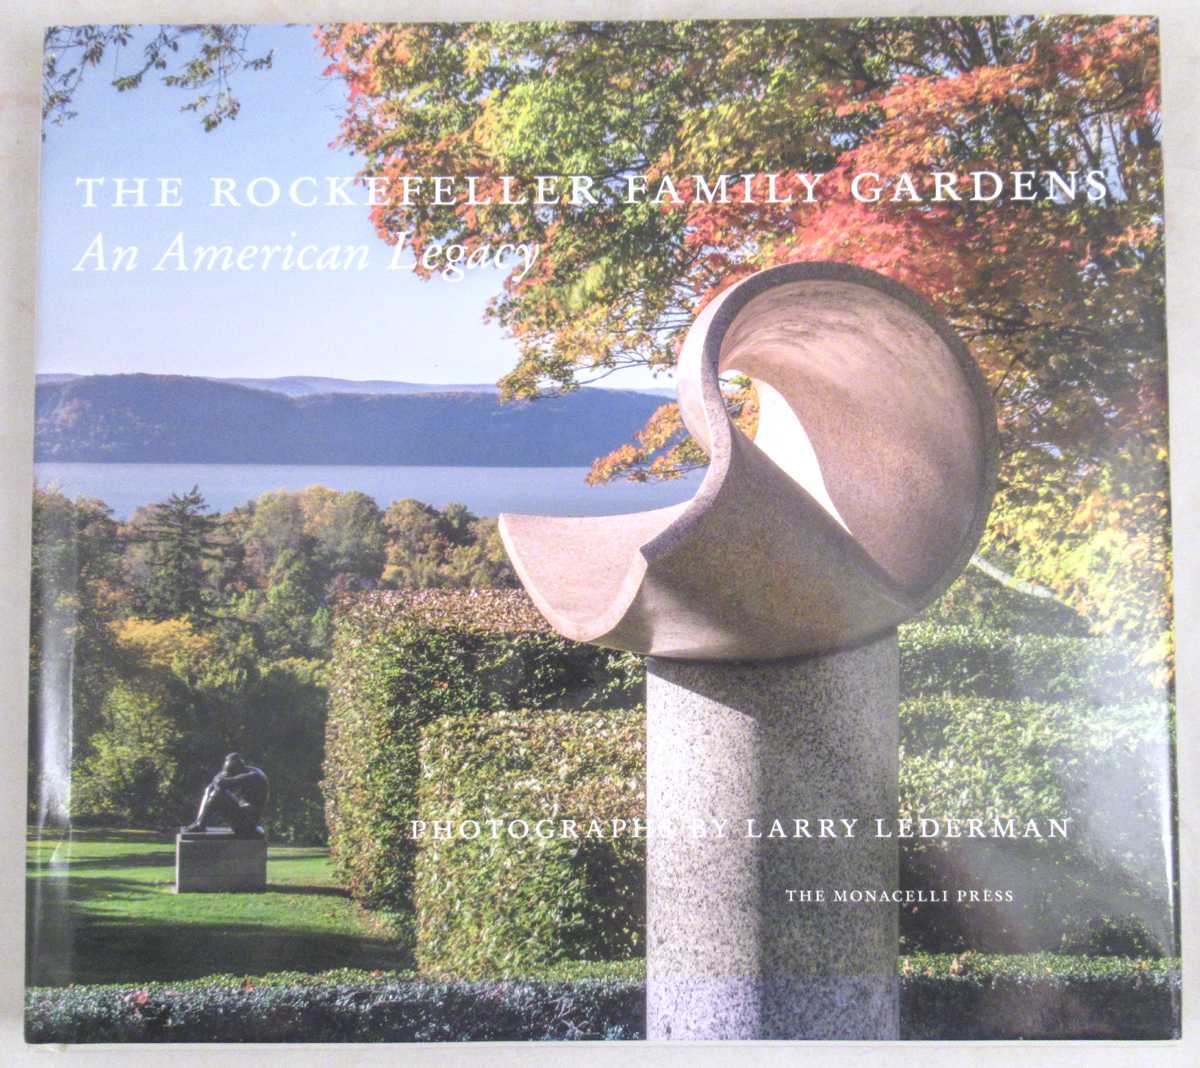 Browning, Dominique; Altman, Cynthia Bronson; Forrest, Todd; Banning, Cassie - The Rockefeller Family Gardens: An American Legacy